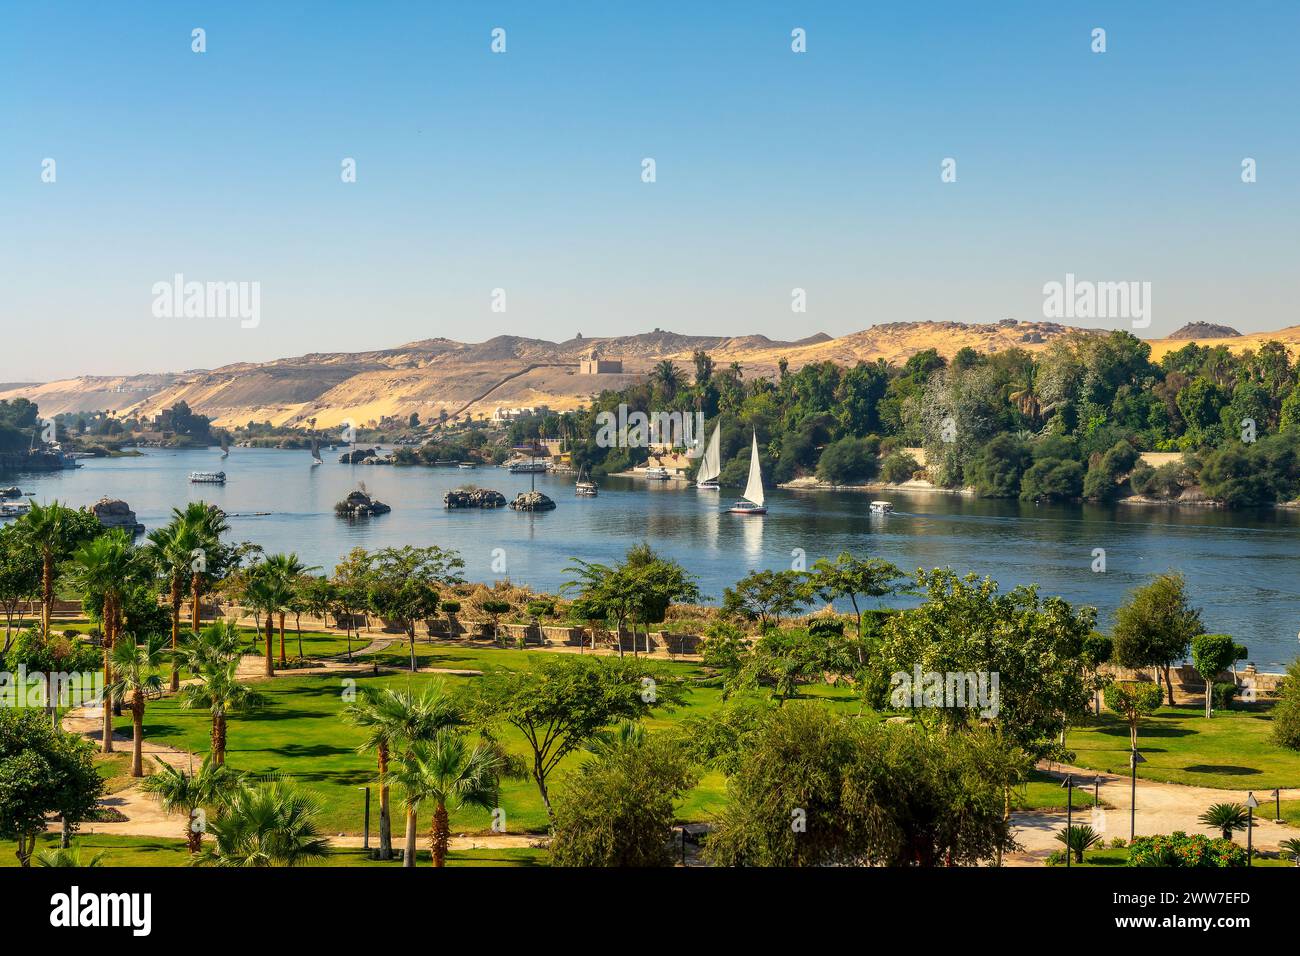 Aerial panoramic view of the Nile river with Feluccas (traditional egyptian sailing boats) in Aswan, Egypt Stock Photo